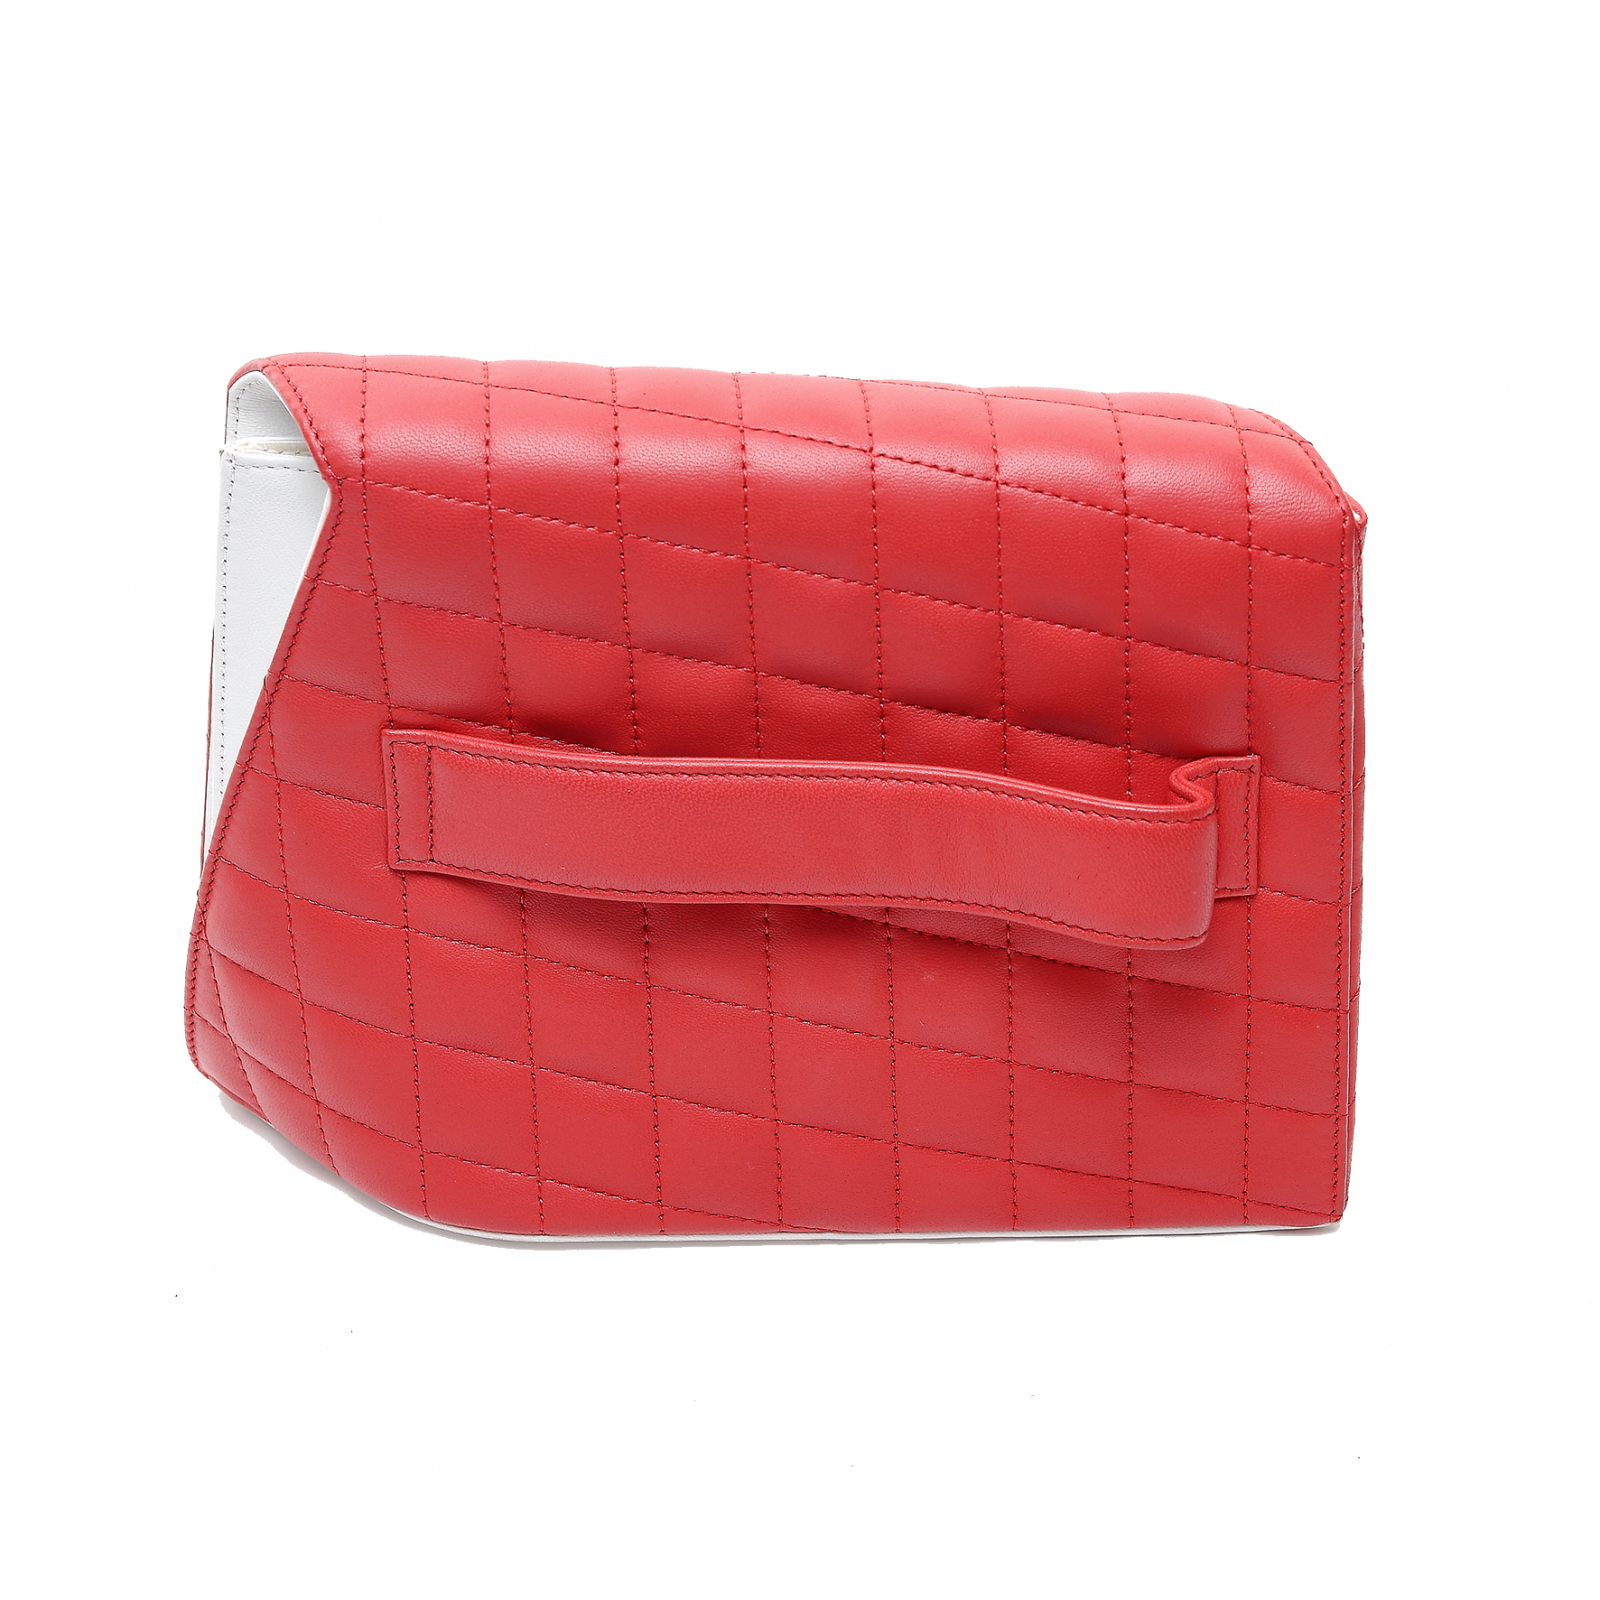 Chanel Red/White Quilted Lambskin Leather Fresh Air Clutch Bag